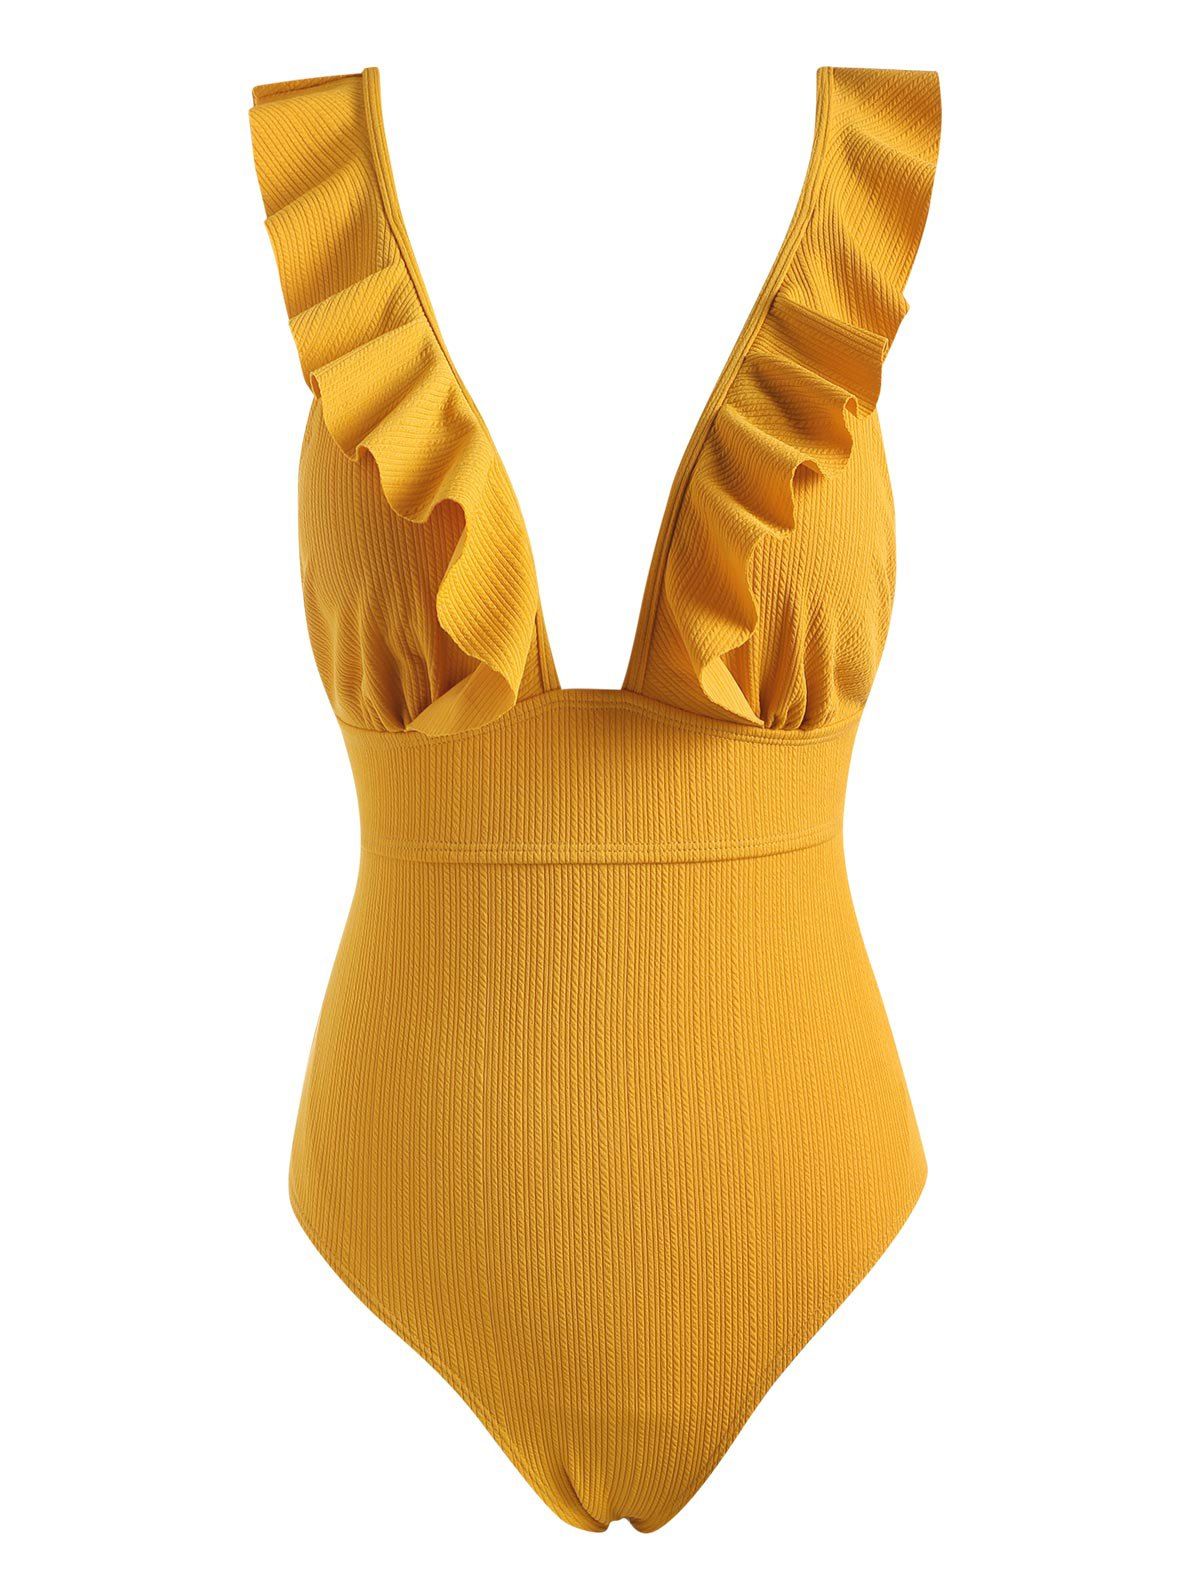 Textured Ribbed Ruffle Lace-up One-piece Swimsuit - DEEP YELLOW L